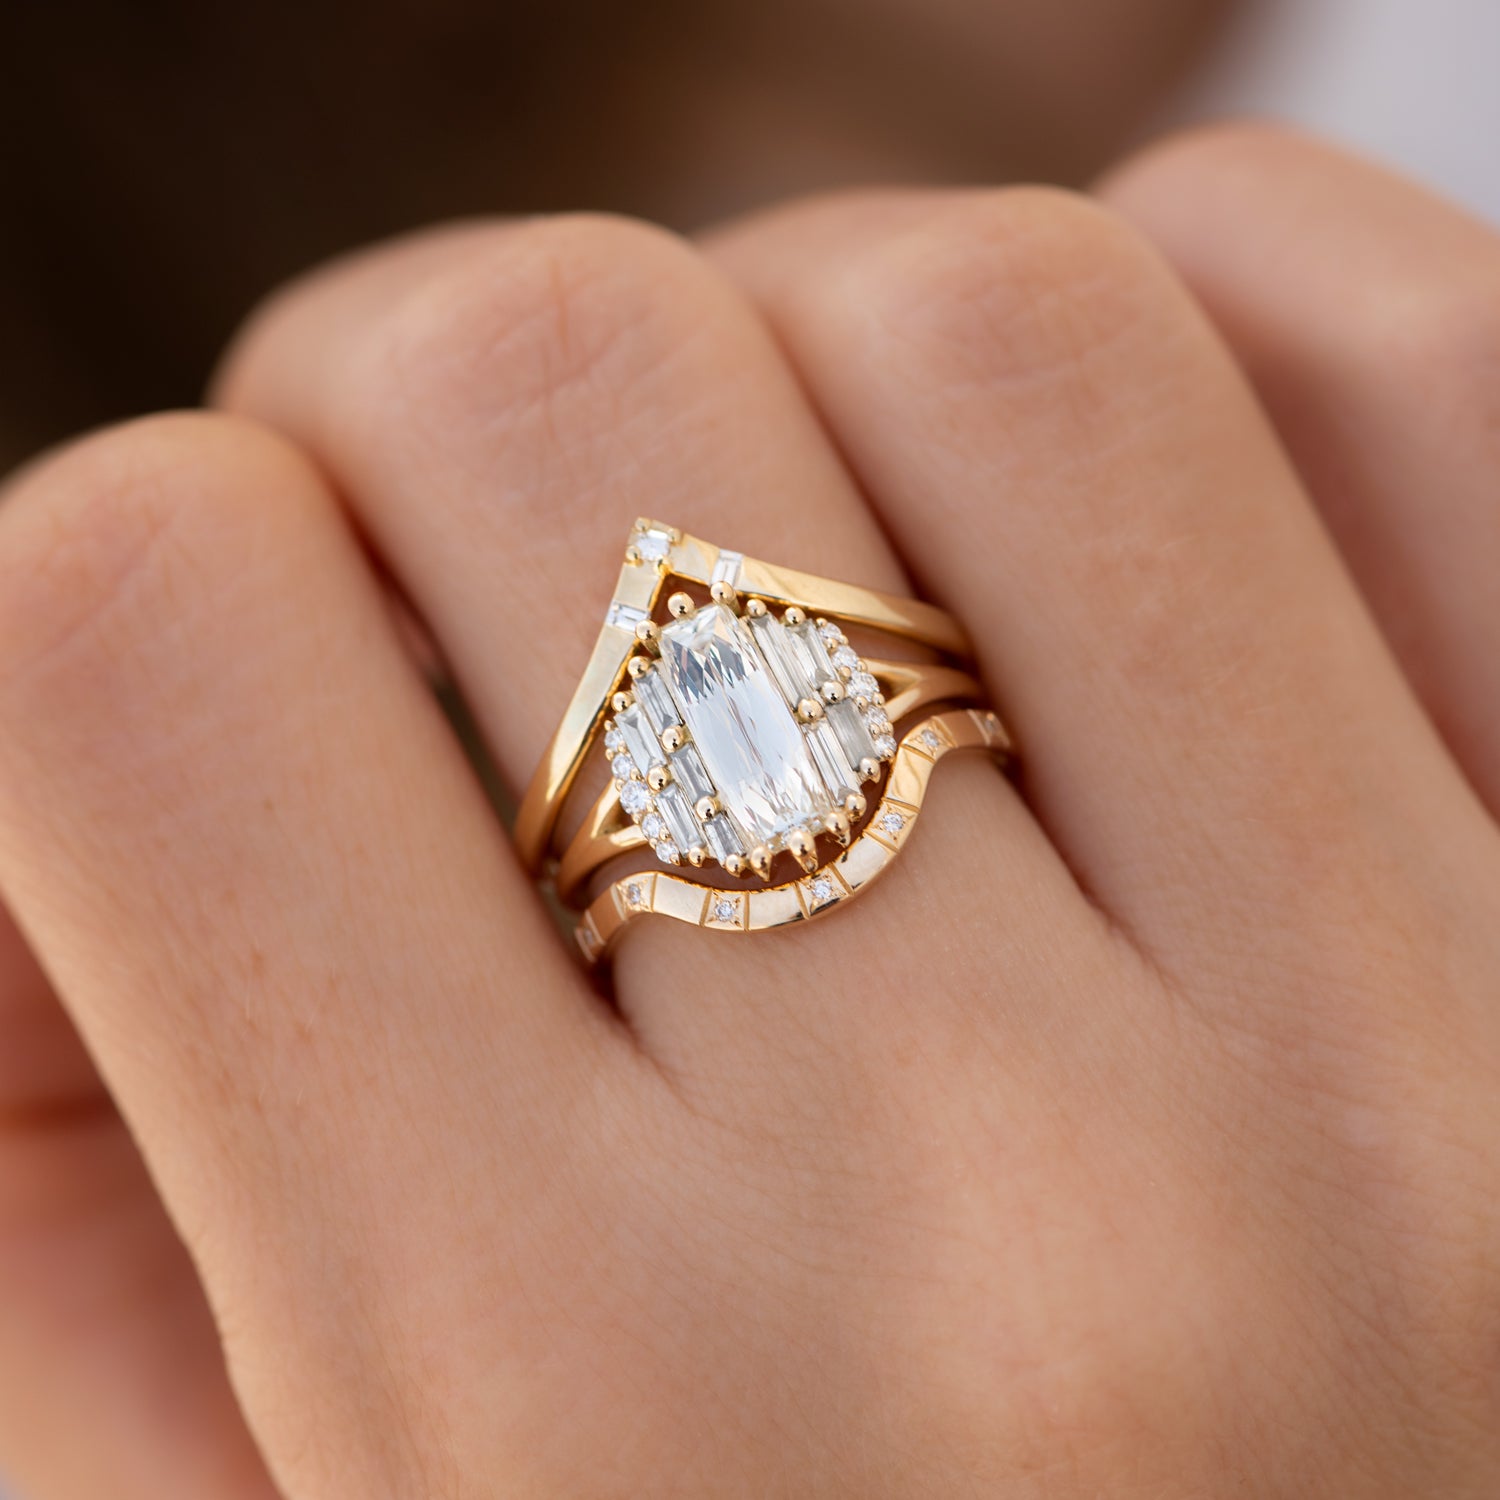 Gray Spinel Engagement Ring with a Golden Zigzag Setting - OOAK – ARTEMER